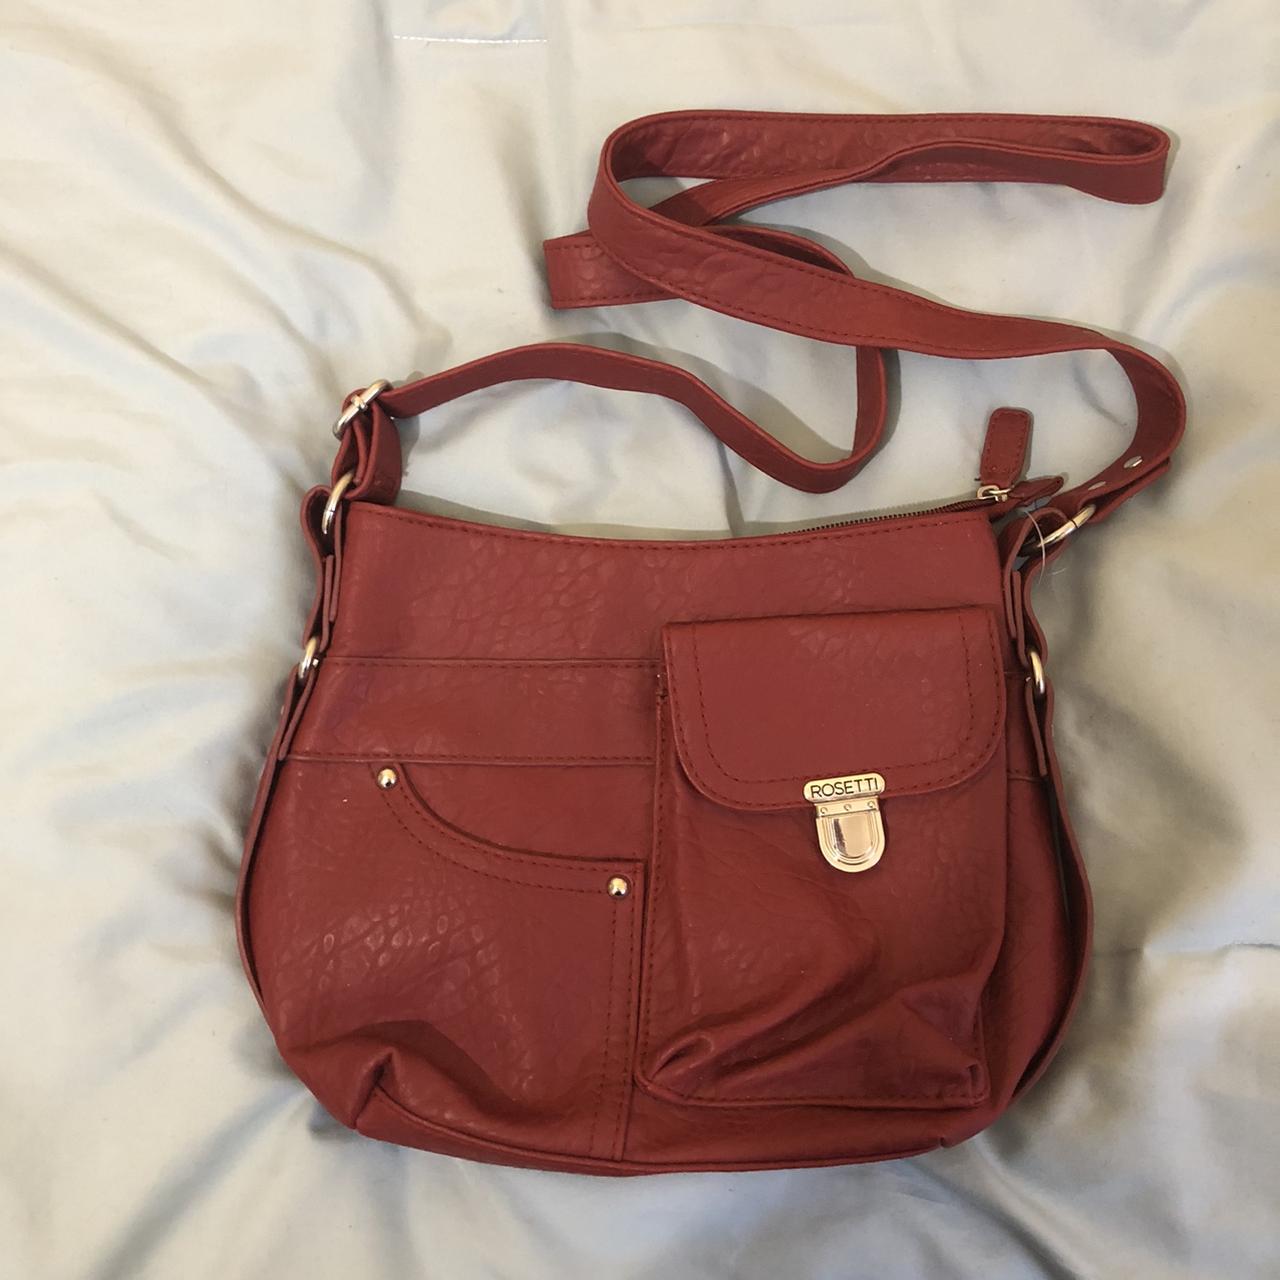 Buy the Set of Mismatched Rosetti Purses | GoodwillFinds